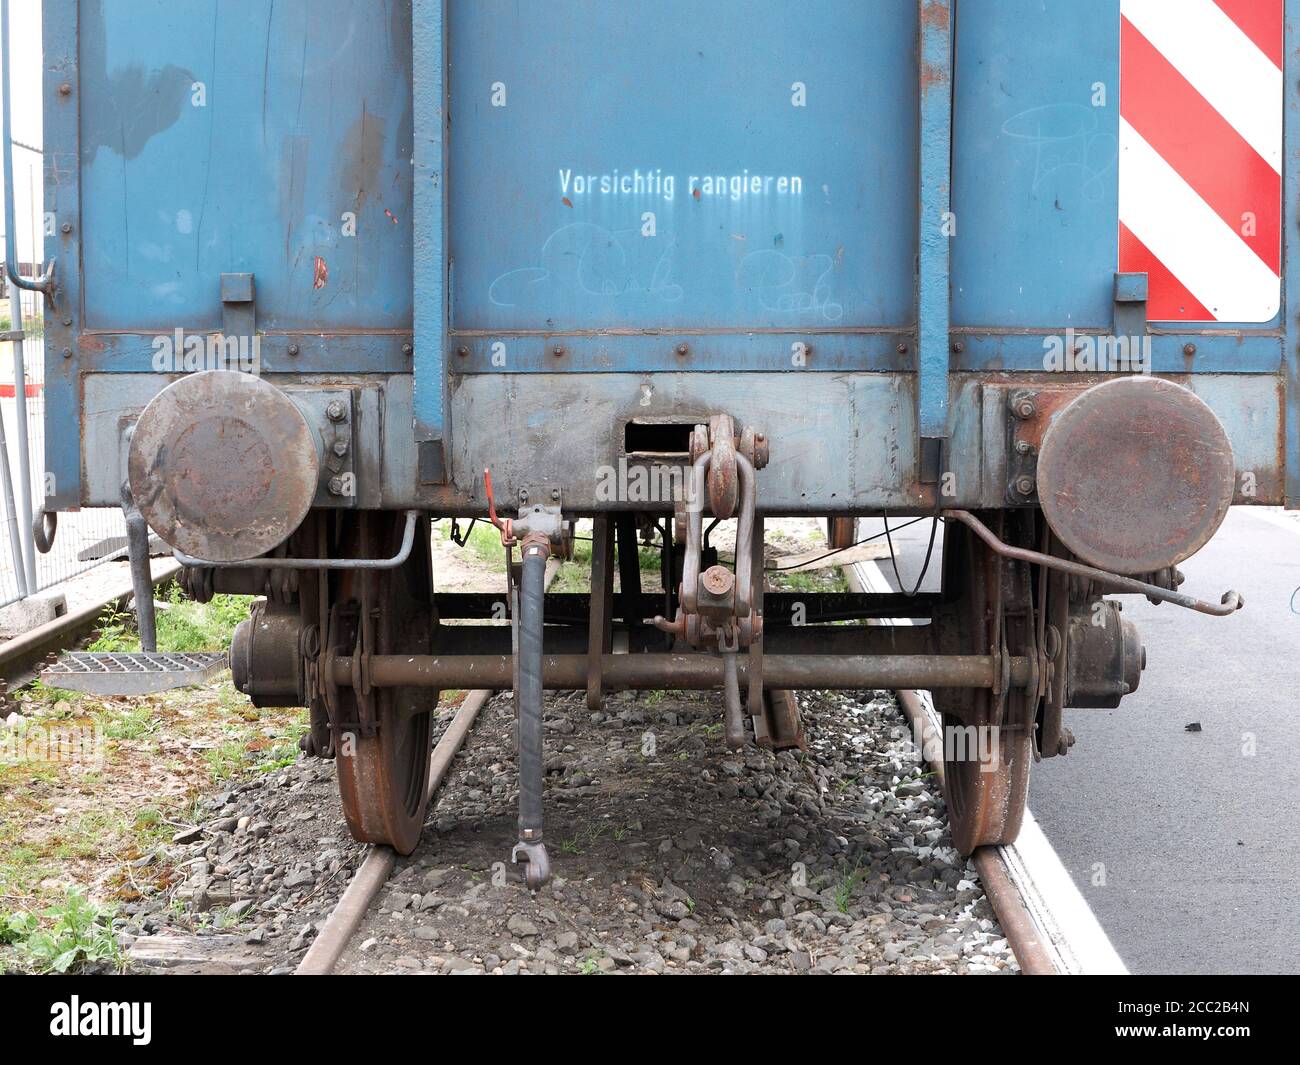 Germany, Offenbach, Abandoned freight car Stock Photo